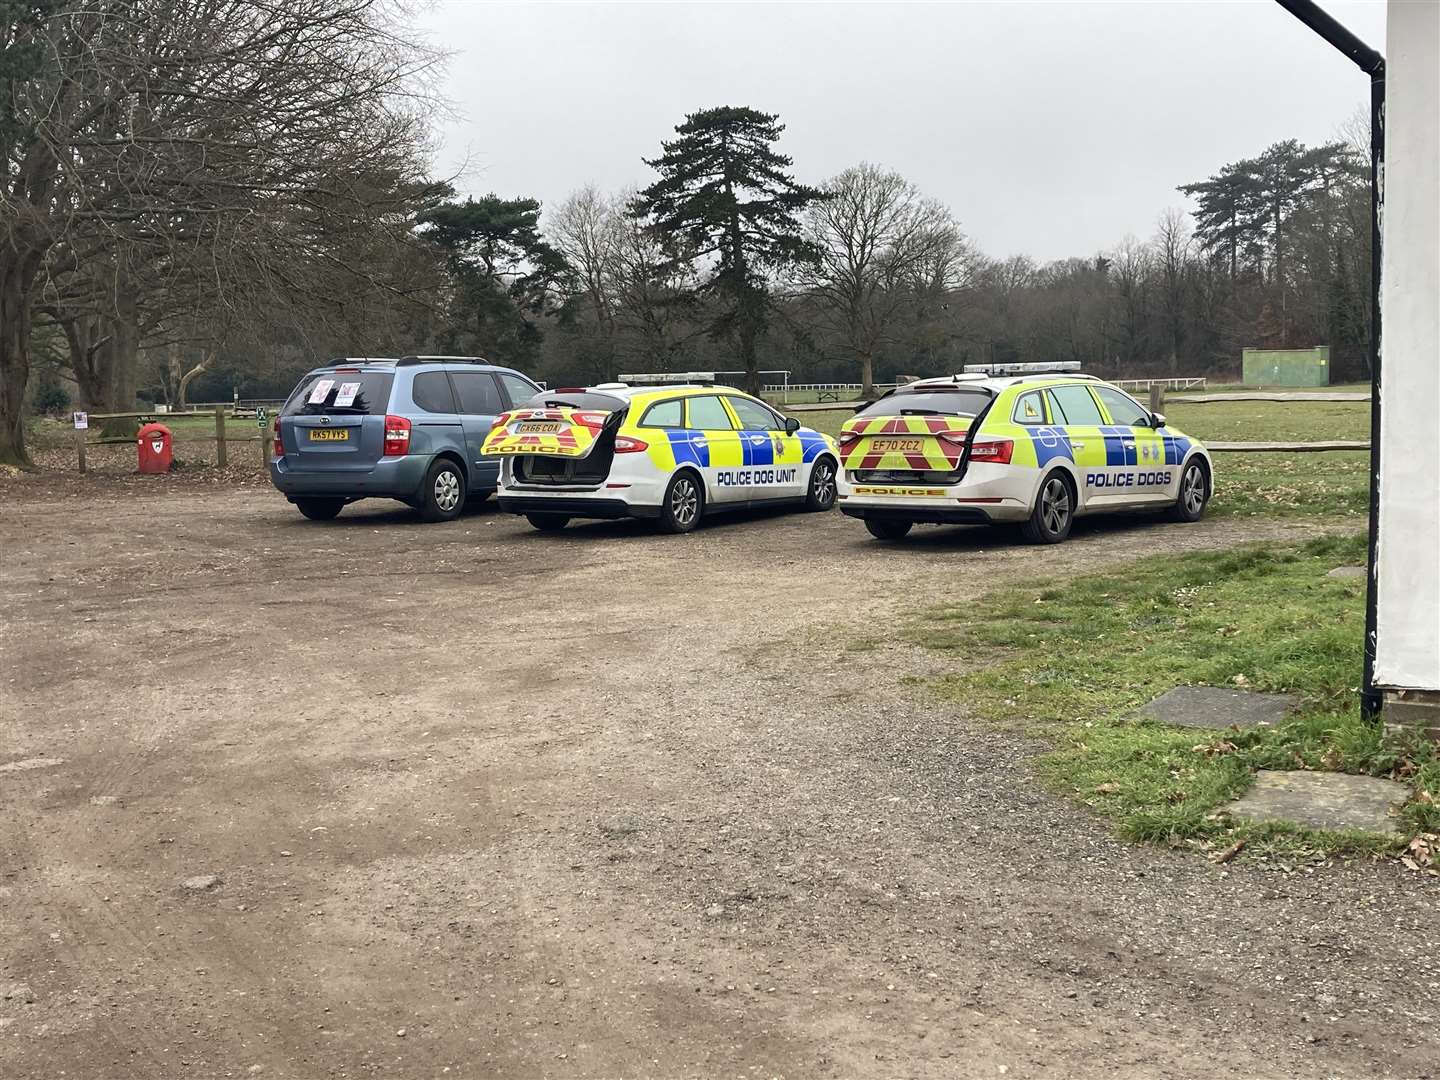 Sussex Police dog unit vehicles at Slindon Cricket Club (Katie Boyden/PA)